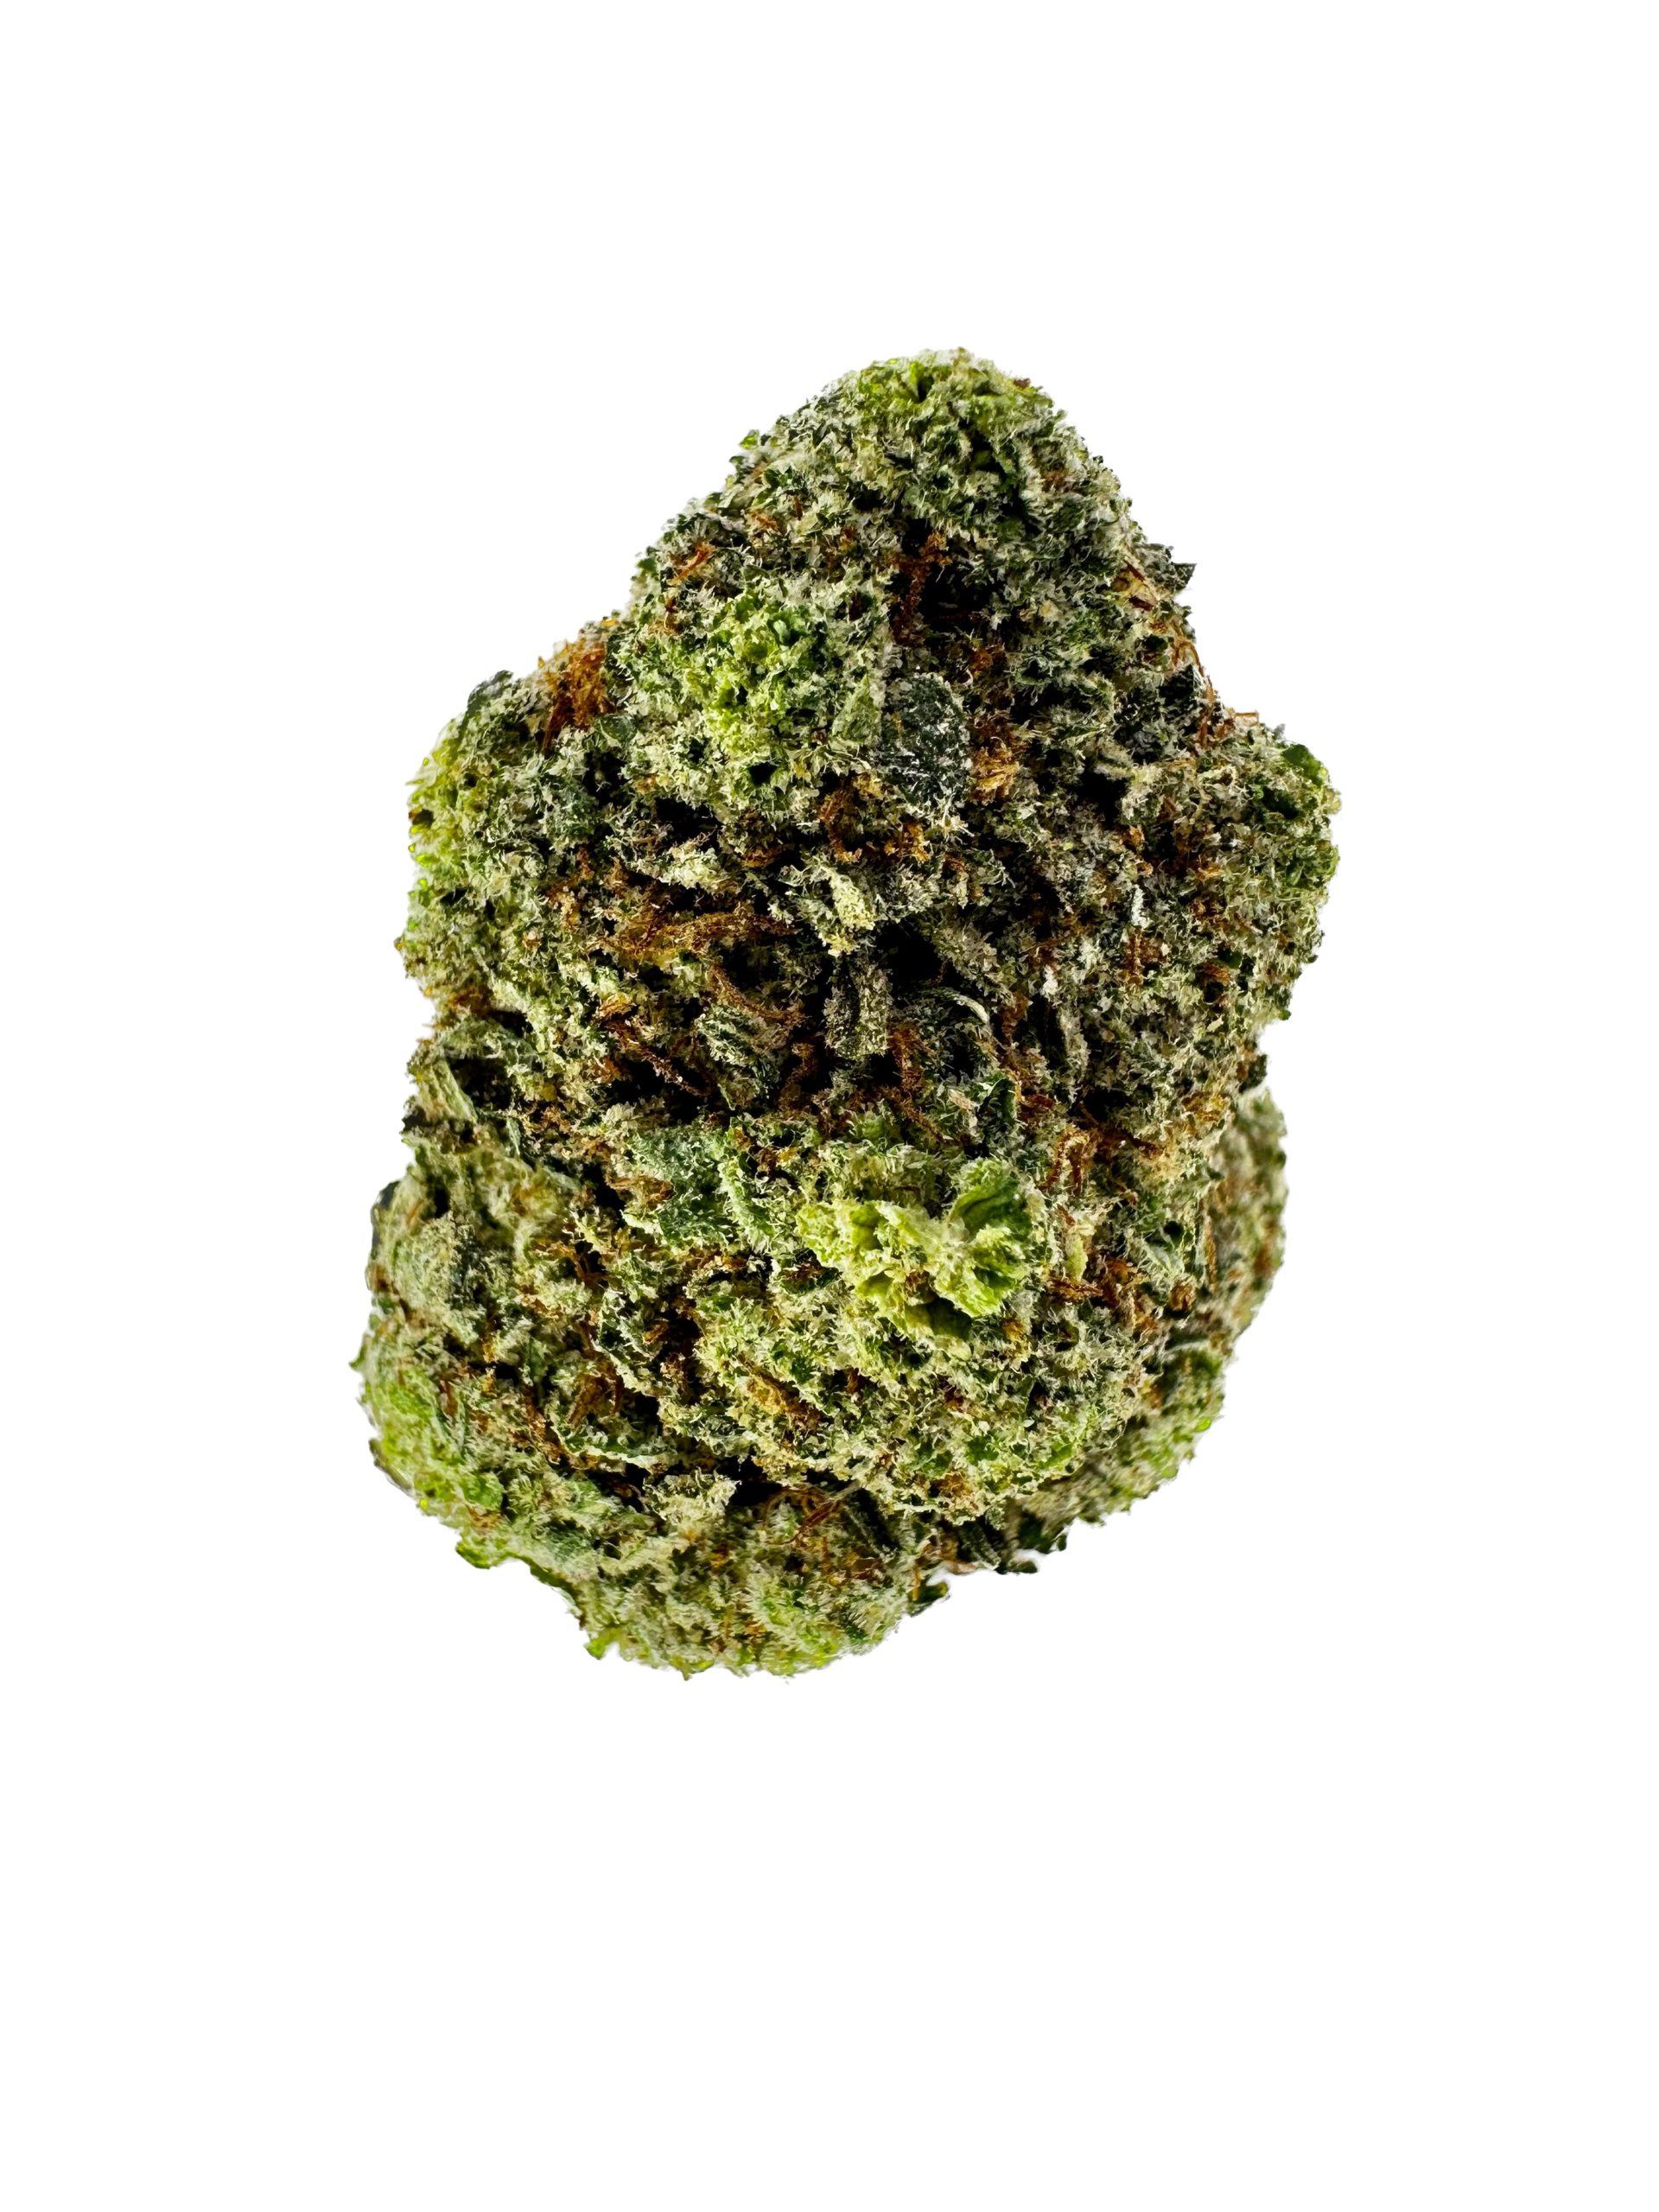 Planet of the Grapes – THC: 26% – Indica Dominant Hybrid – 70% Indica / 30% Sativa